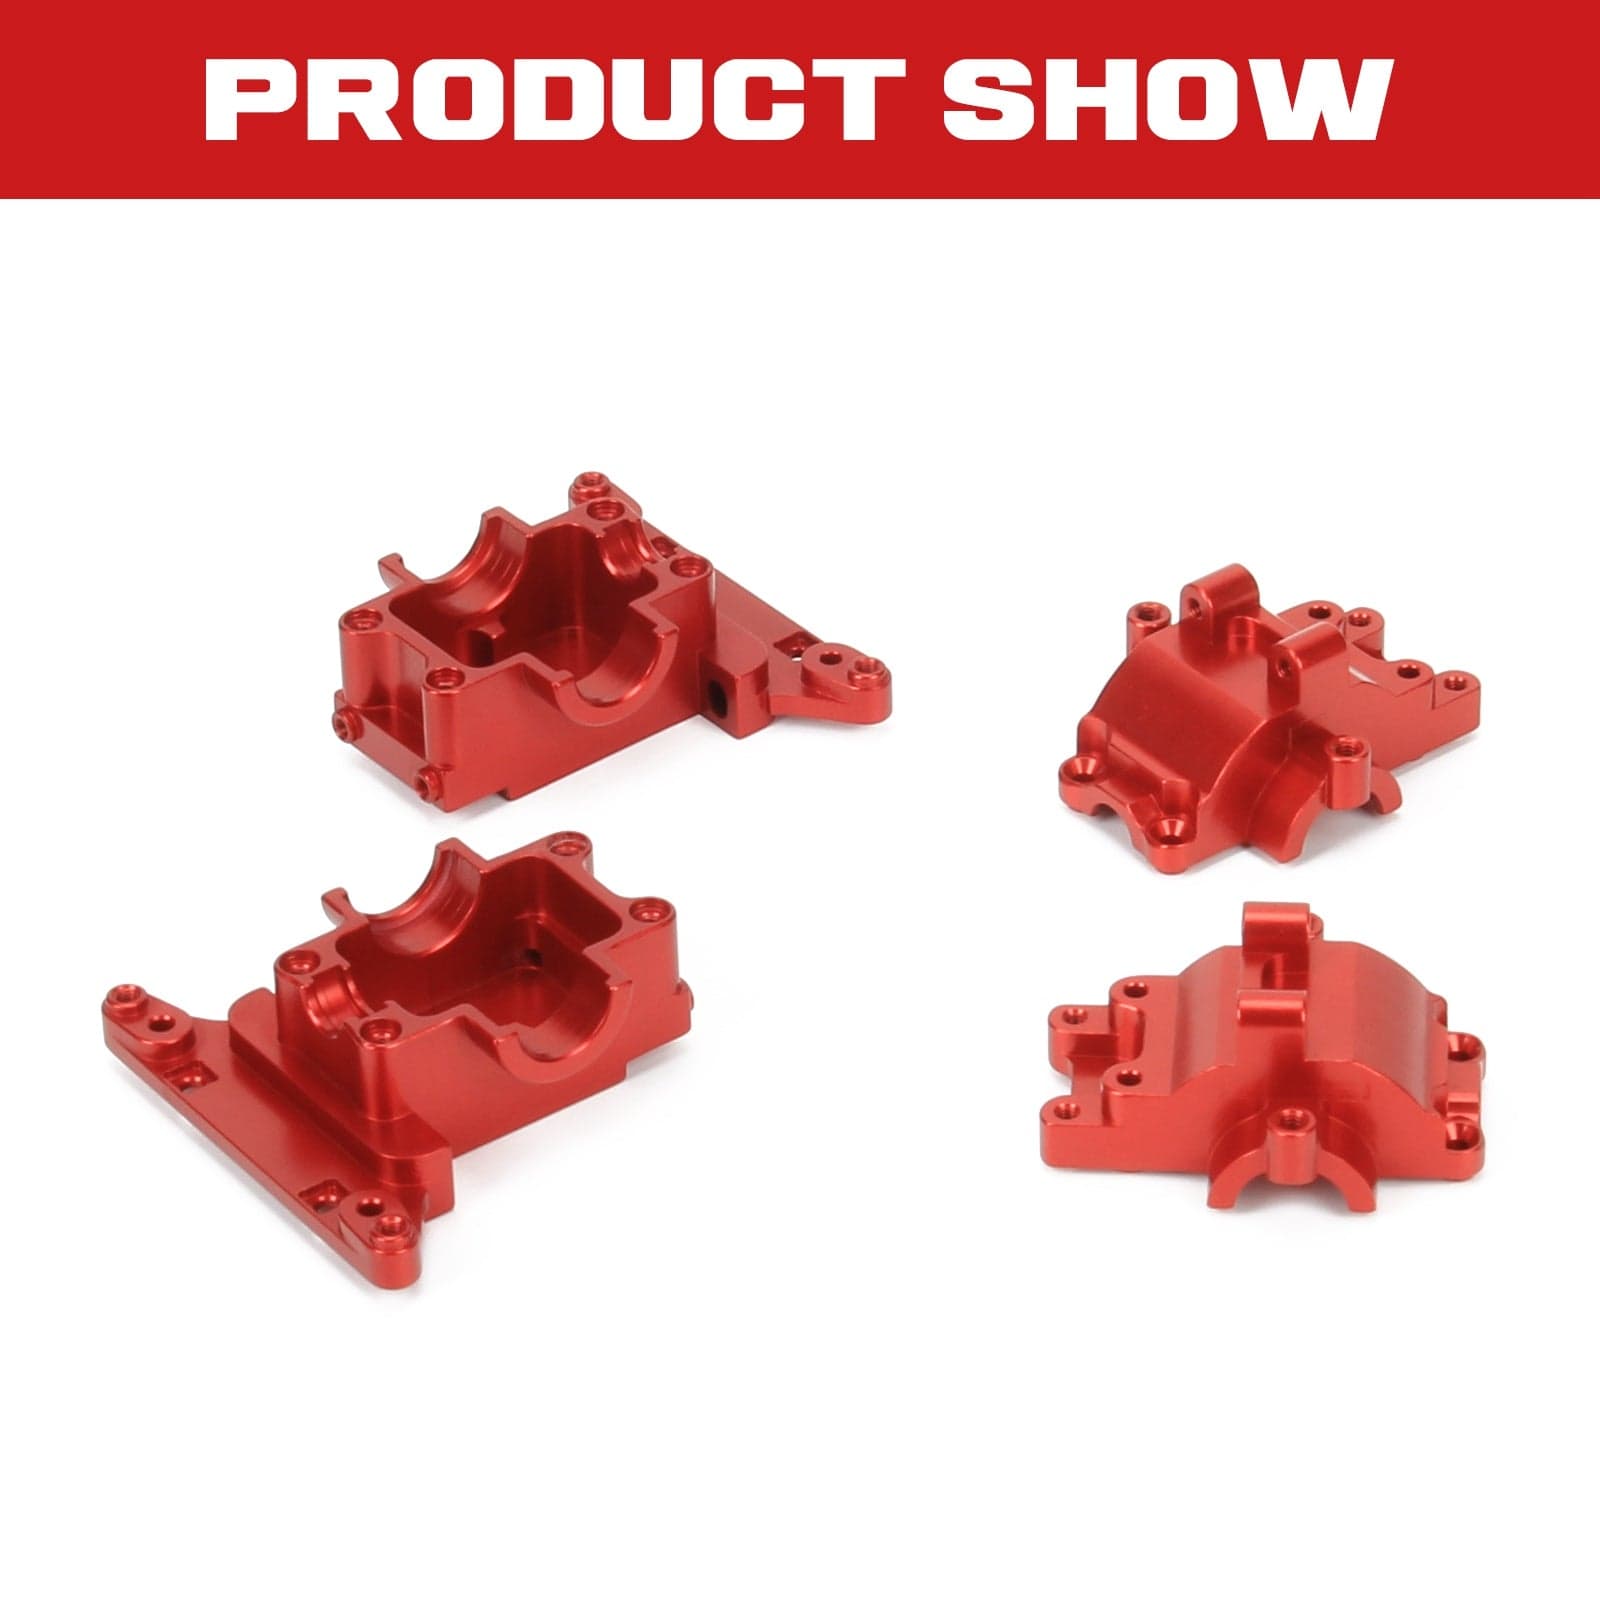 RCAWD REDCAT GEN8 RCAWD Alloy Differential Housing for 1/18 Traxxas Upgrade Parts